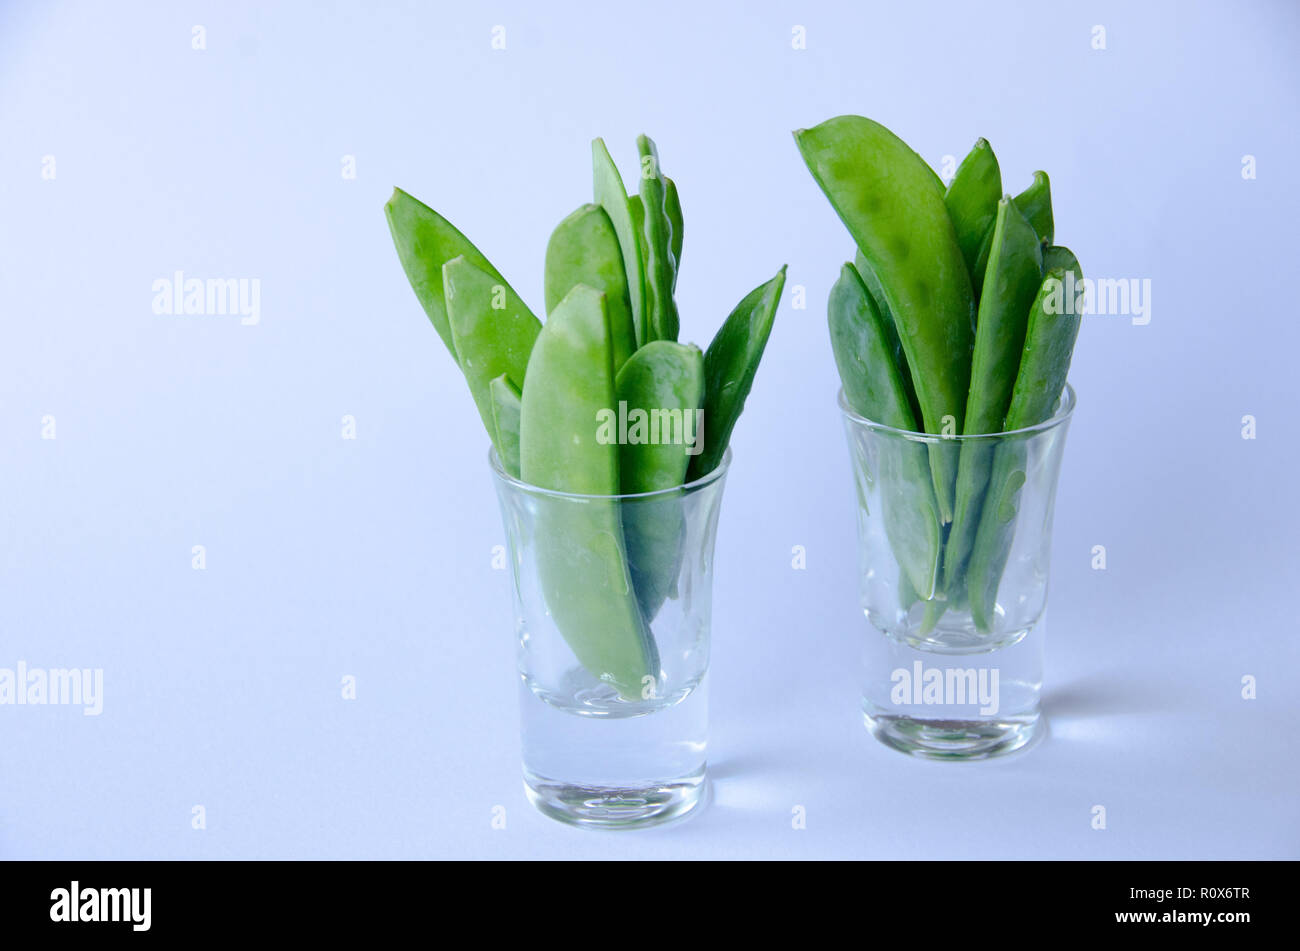 A bunch of snow peas standing up in a little glass on white background Stock Photo